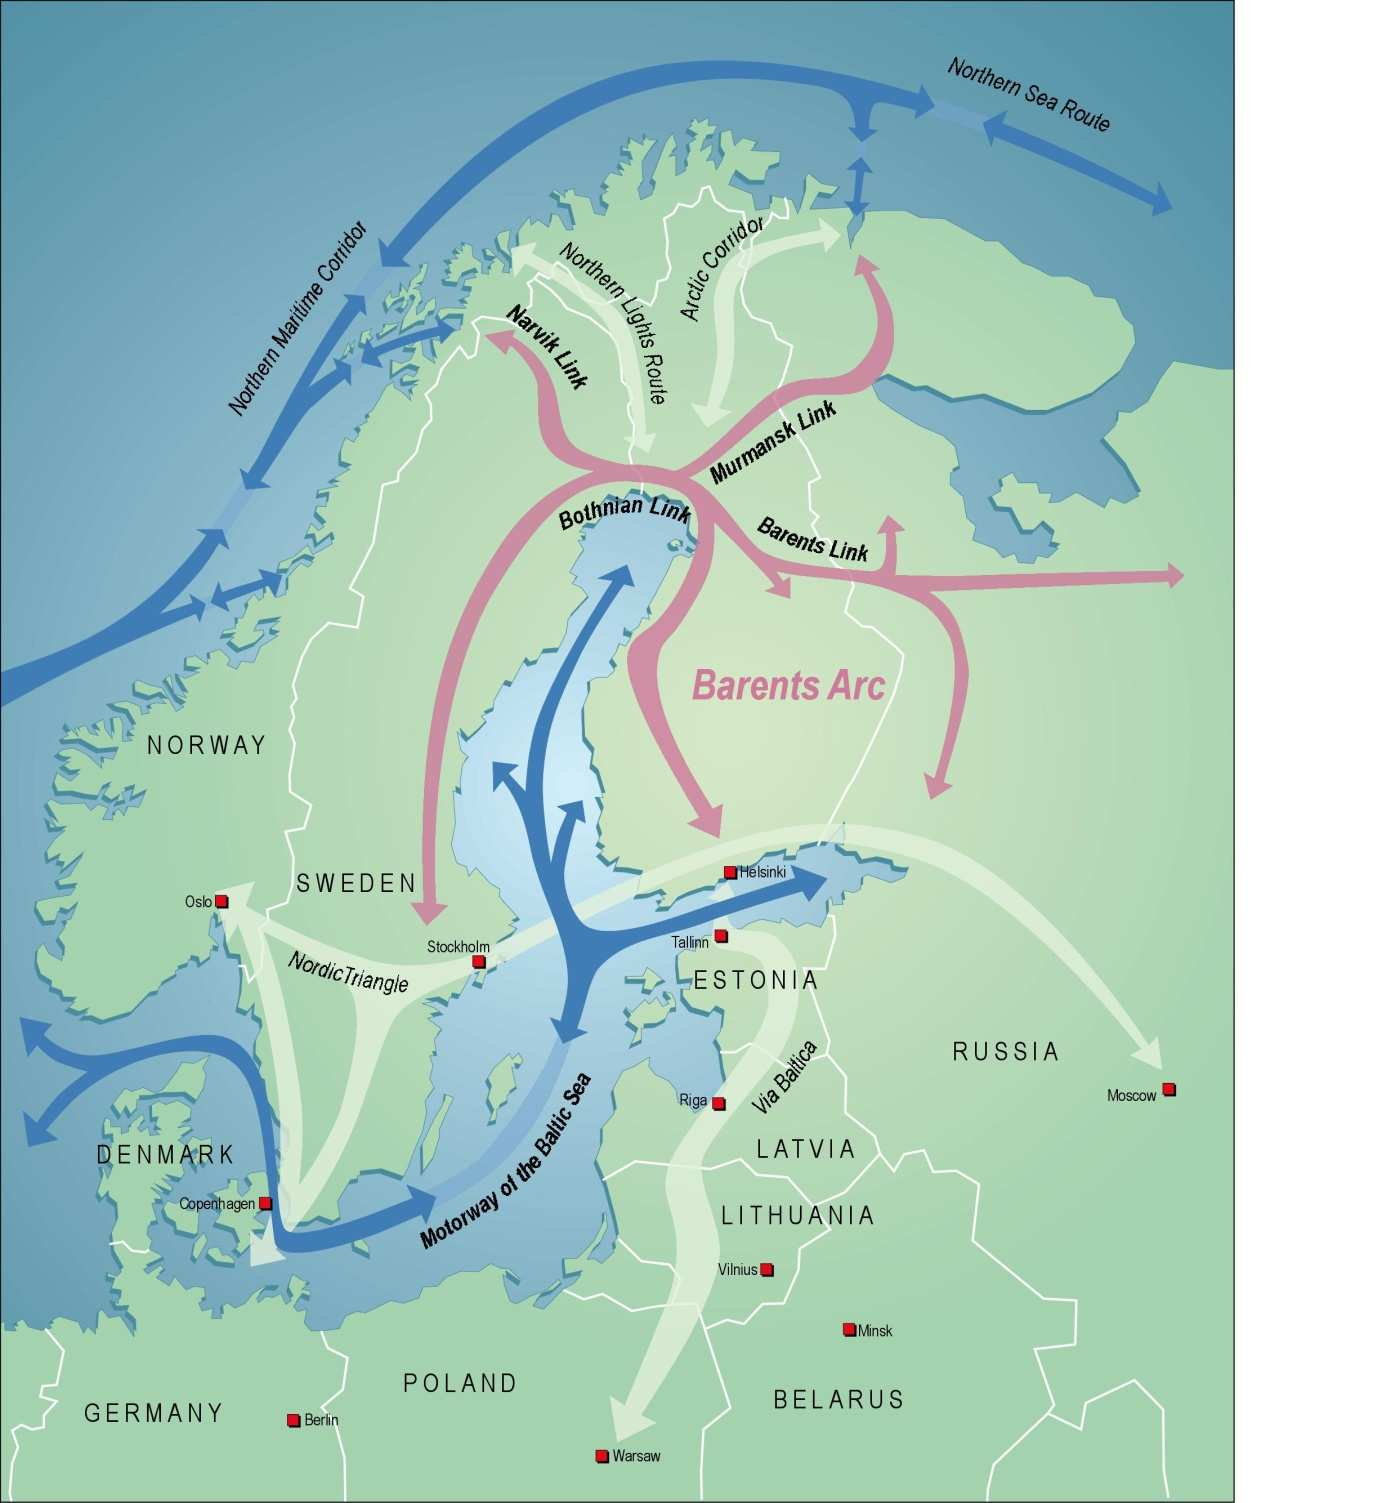 Barents Arc international traffic corridors in Northern Finland The Barents Arc is made up of several linked traffic corridors Barents Link Murmansk Link Bothnian Link Narvik Link A natural